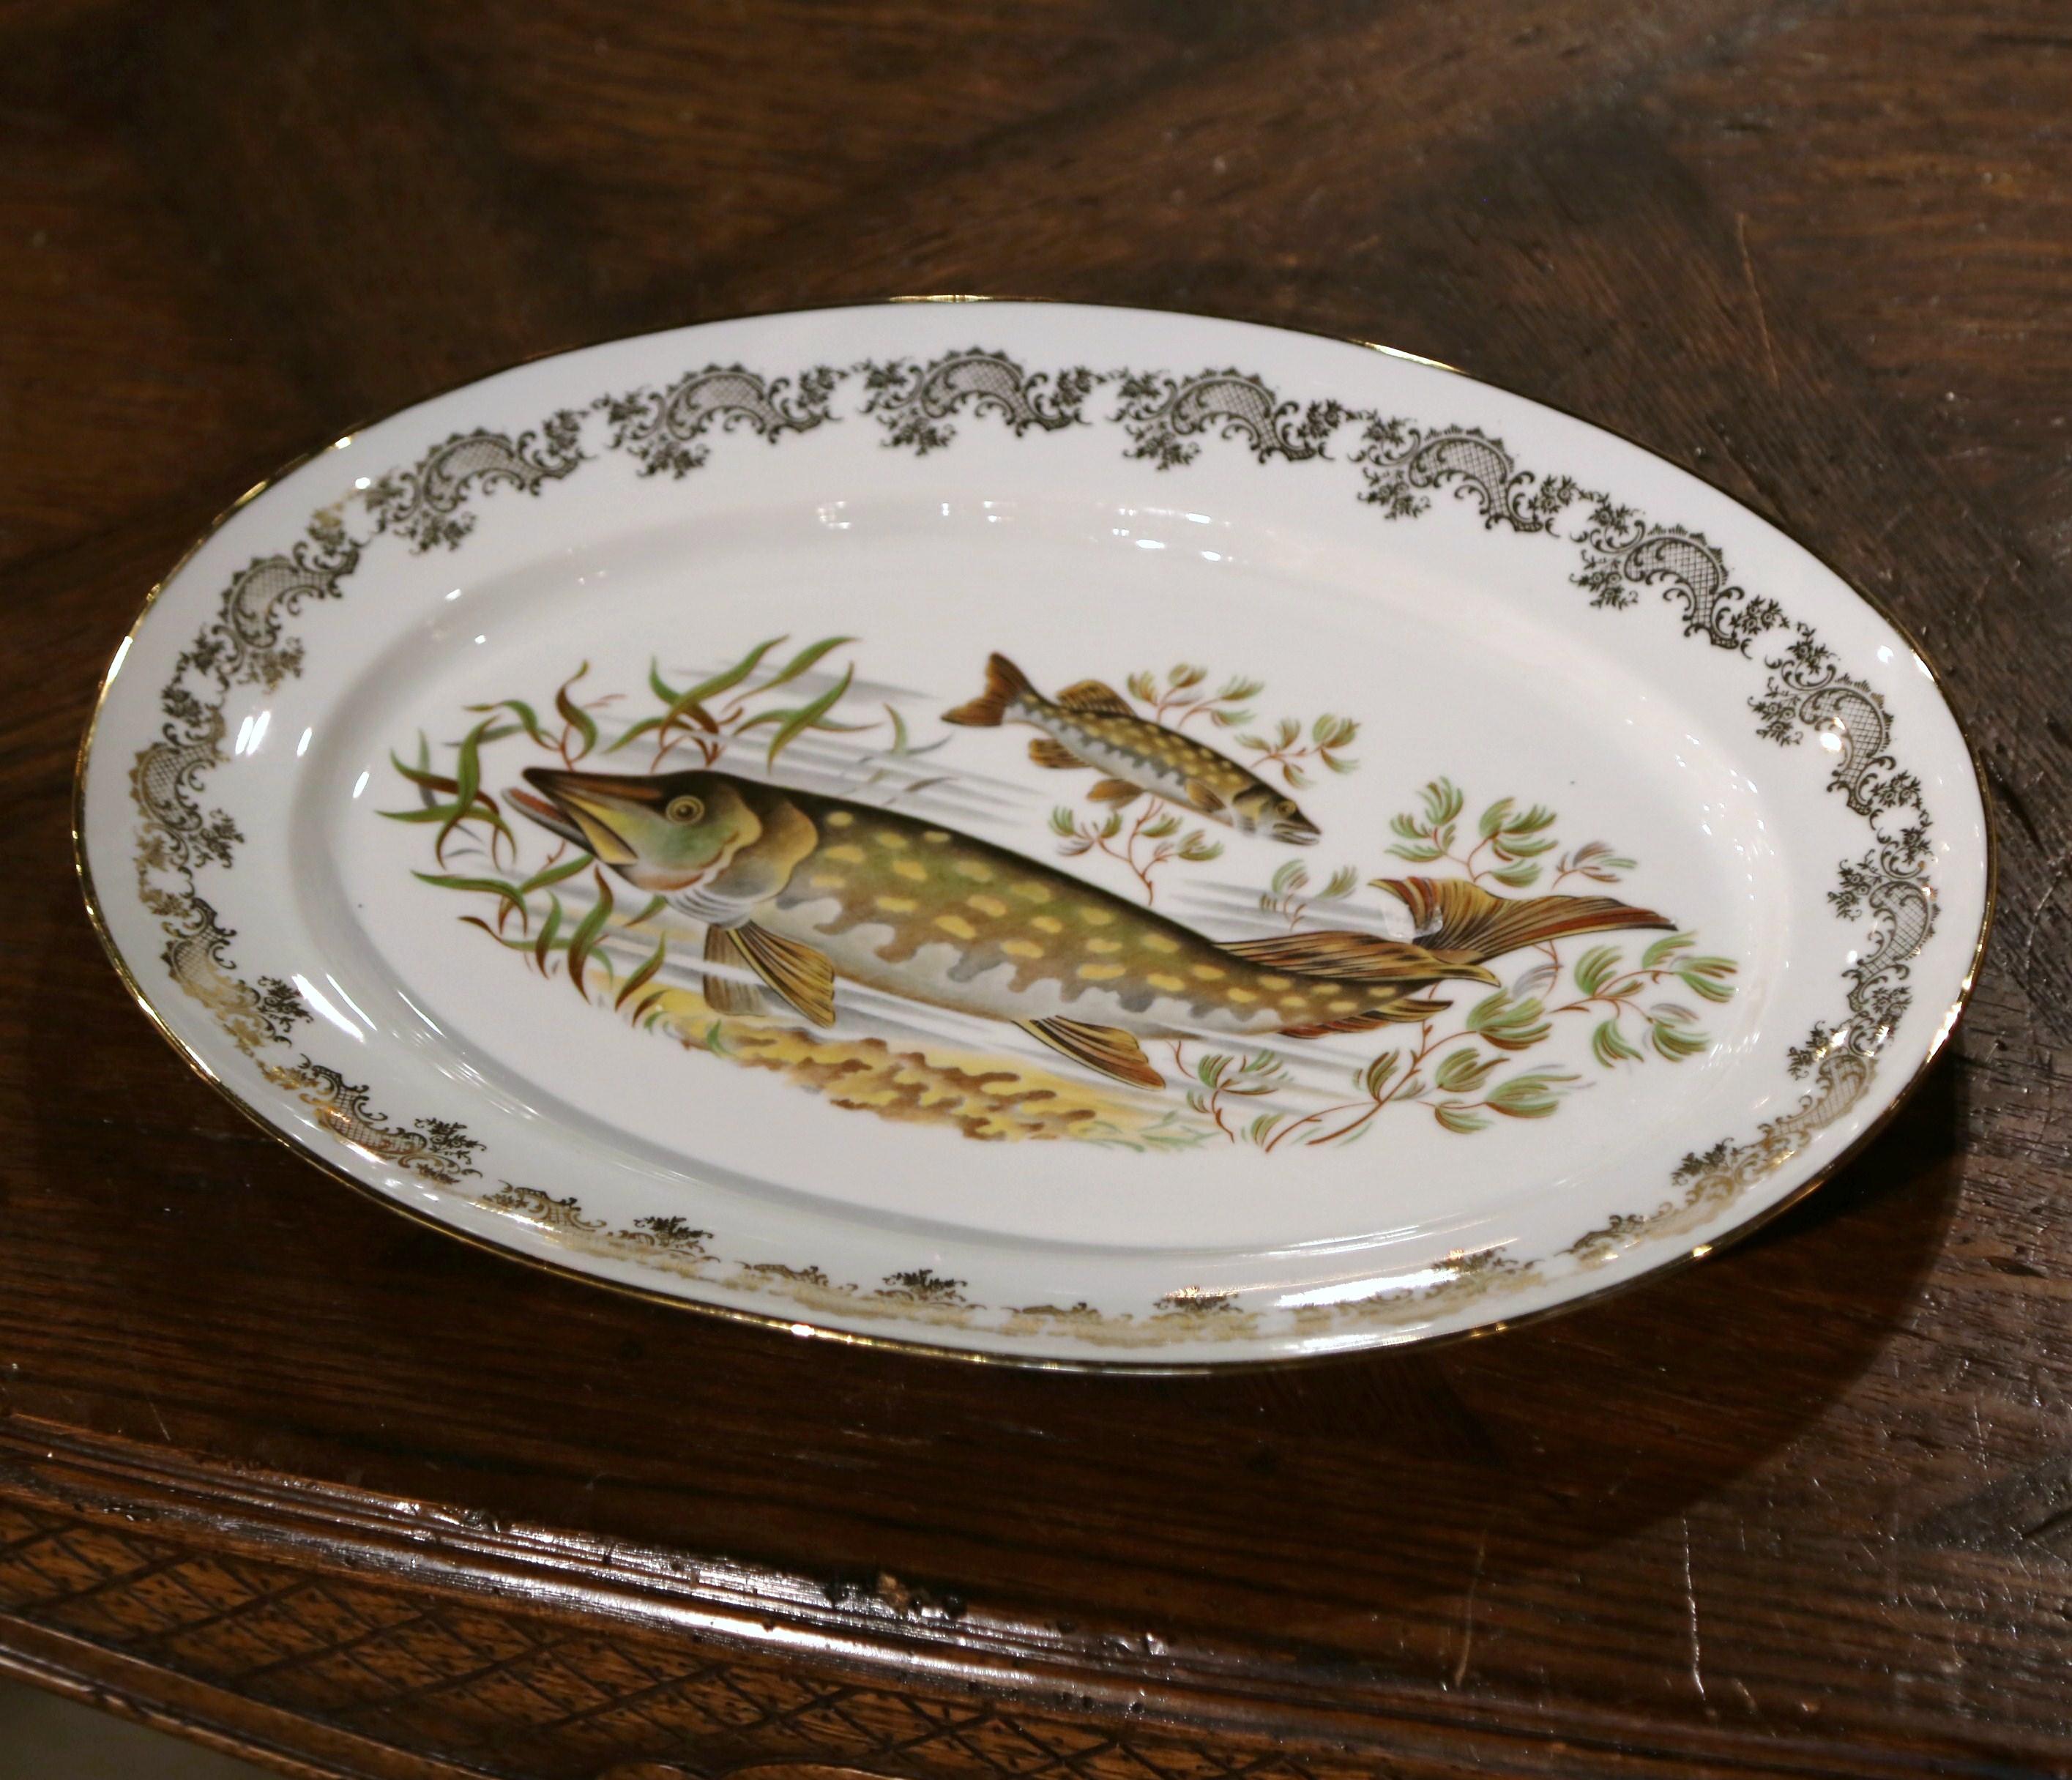 Abalone French Limoges Porcelain Service with Fish Decor Signed Benoit, Set of 13 For Sale